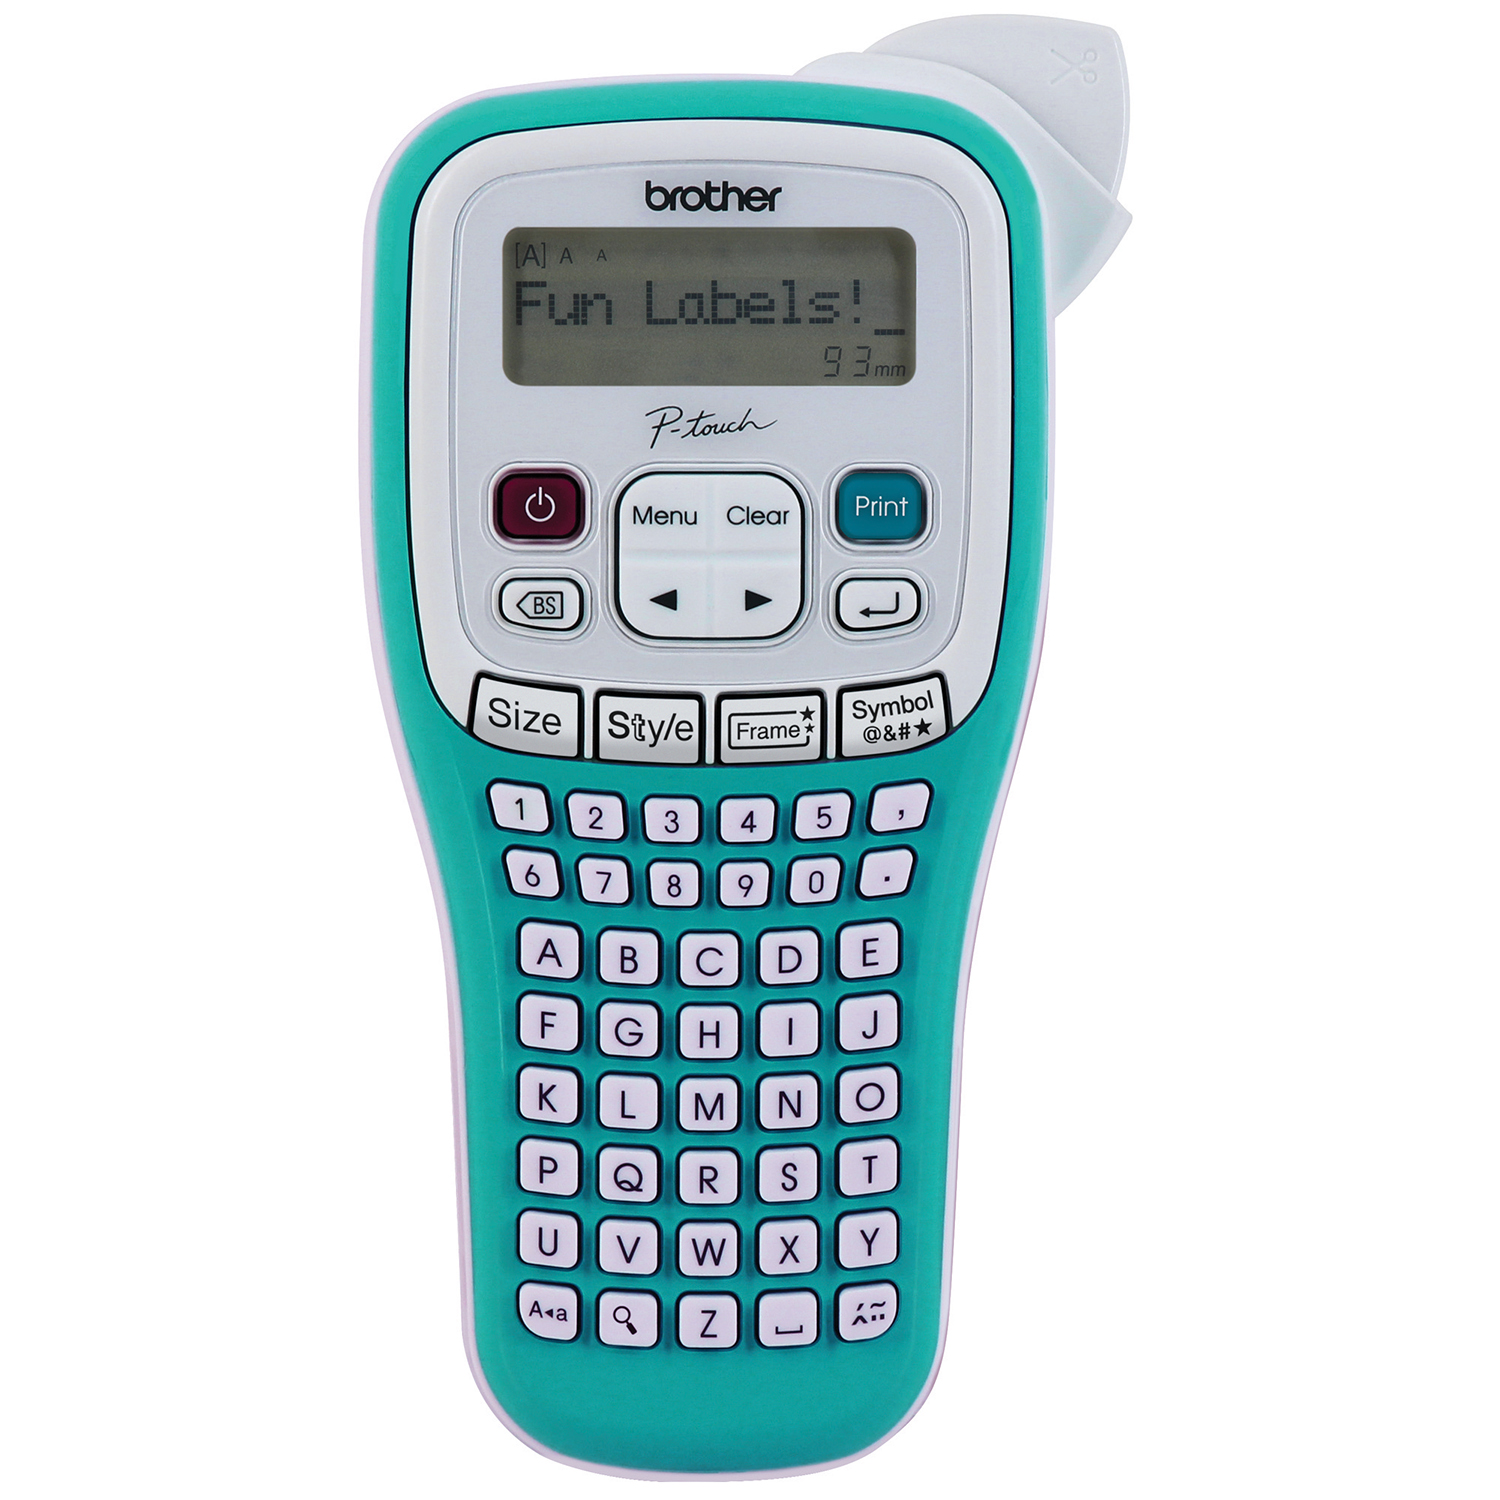 Brother P-Touch PT-2040C Label Maker for sale online